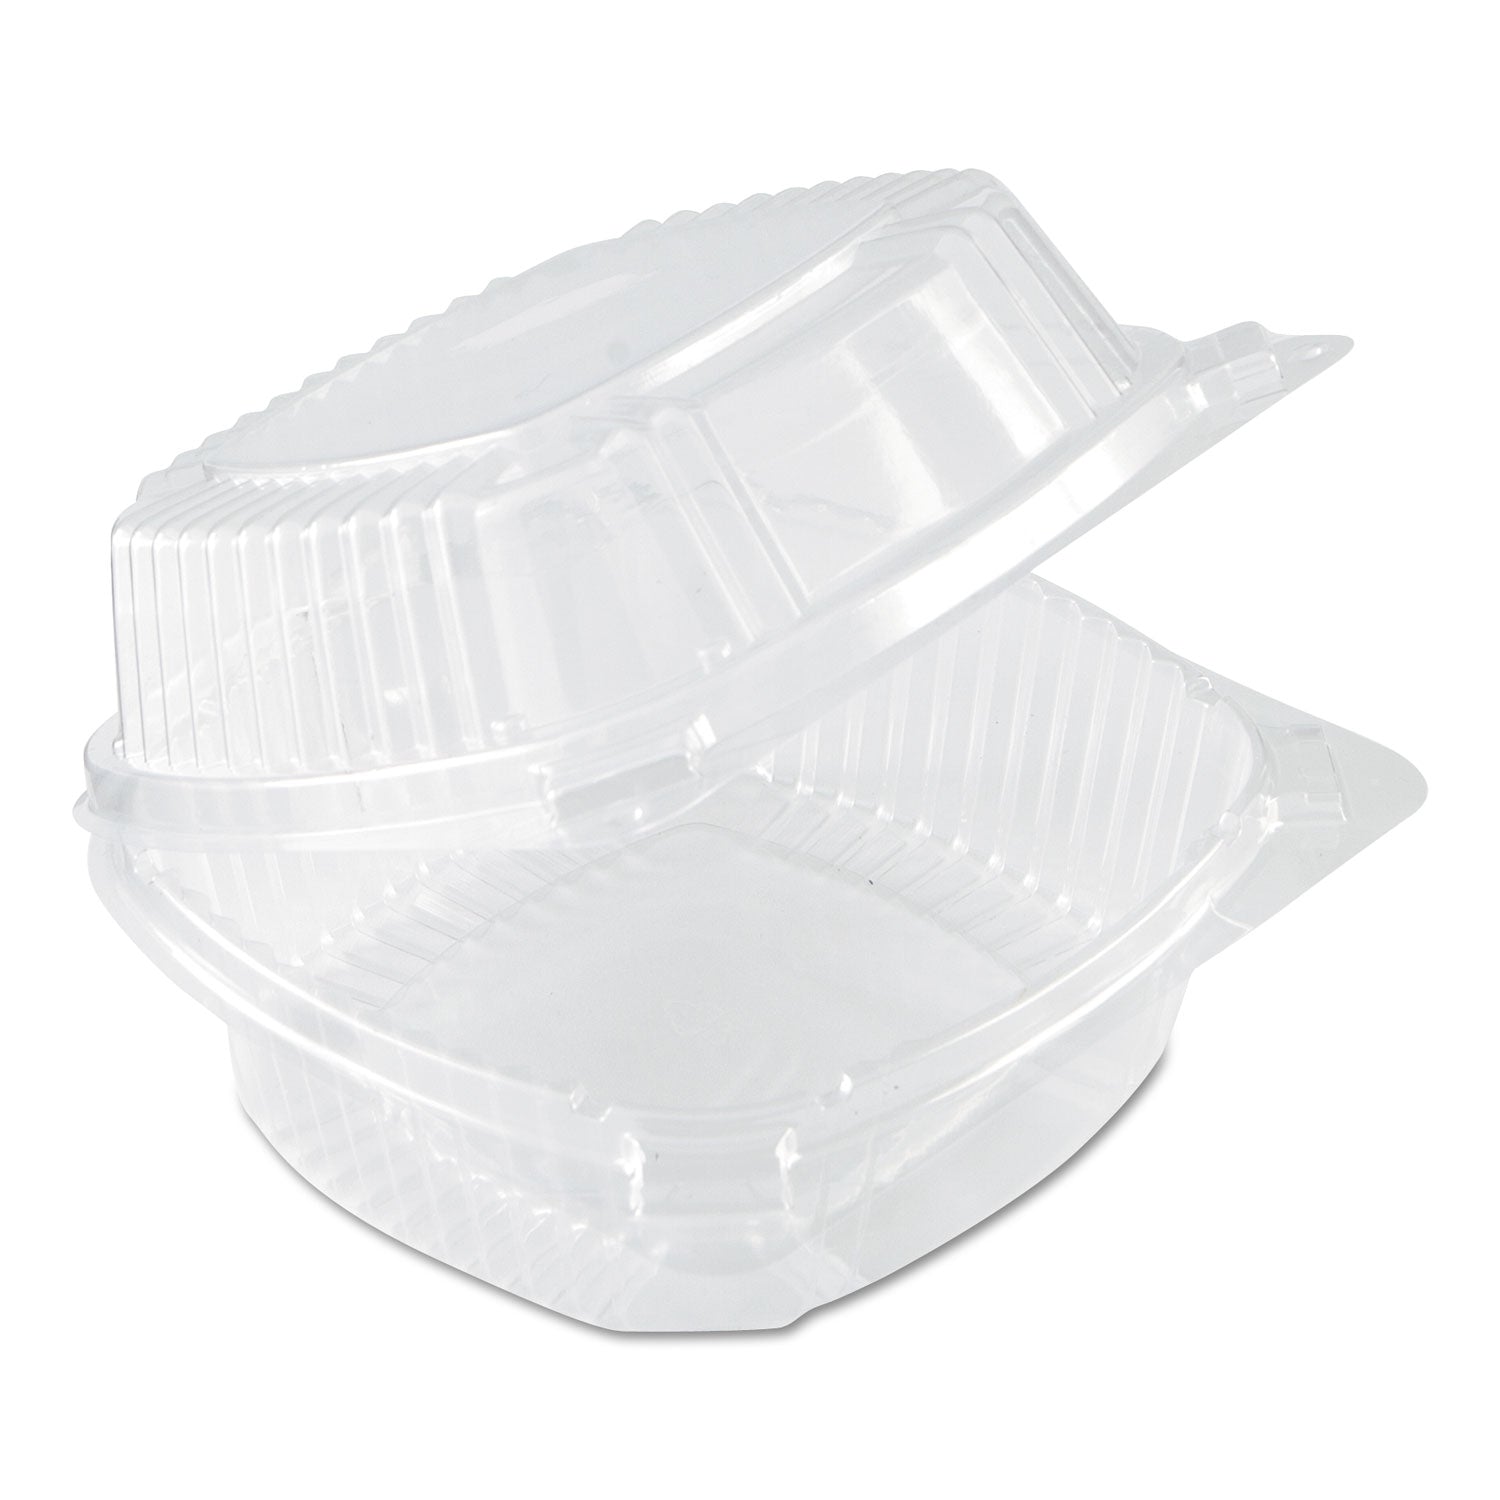 clearview-smartlock-hinged-lid-container-20-oz-575-x-6-x-3-clear-plastic-500-carton_pctyci81160 - 1